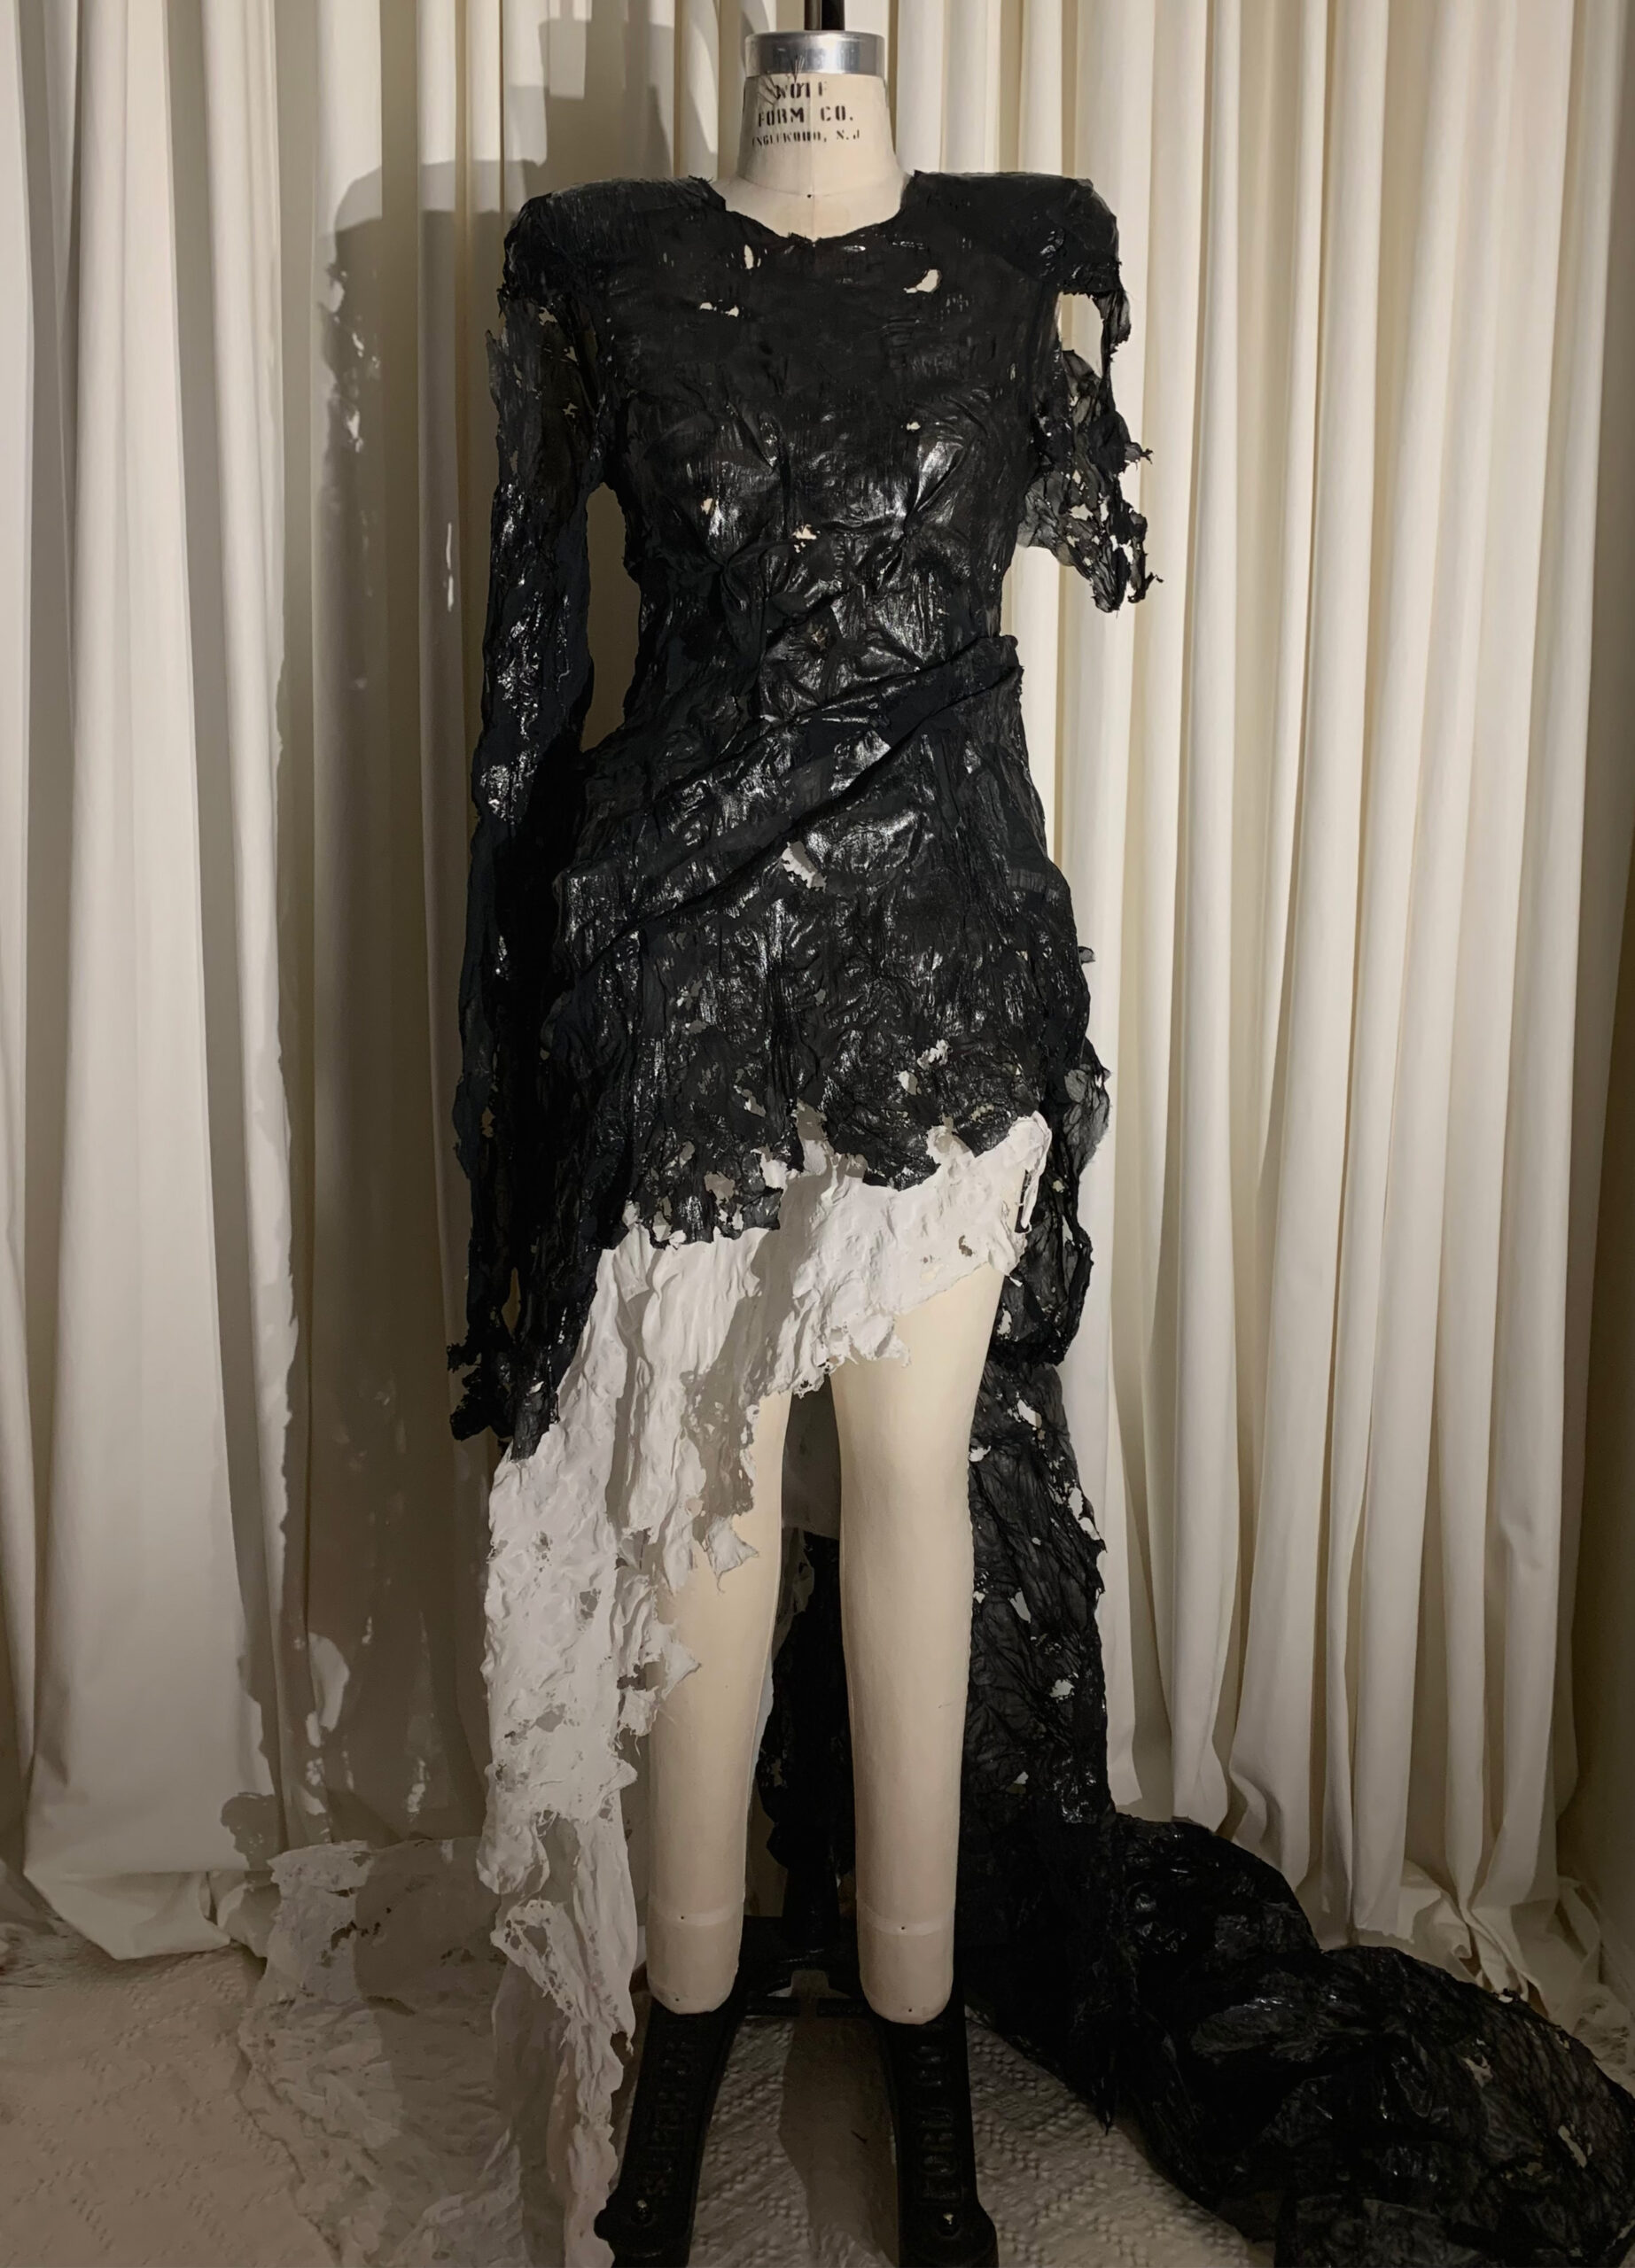 Oil spill gown, with asymmetrical melted crinoline. Layers of melted chiffon and glue laminated into a 4 foot train.